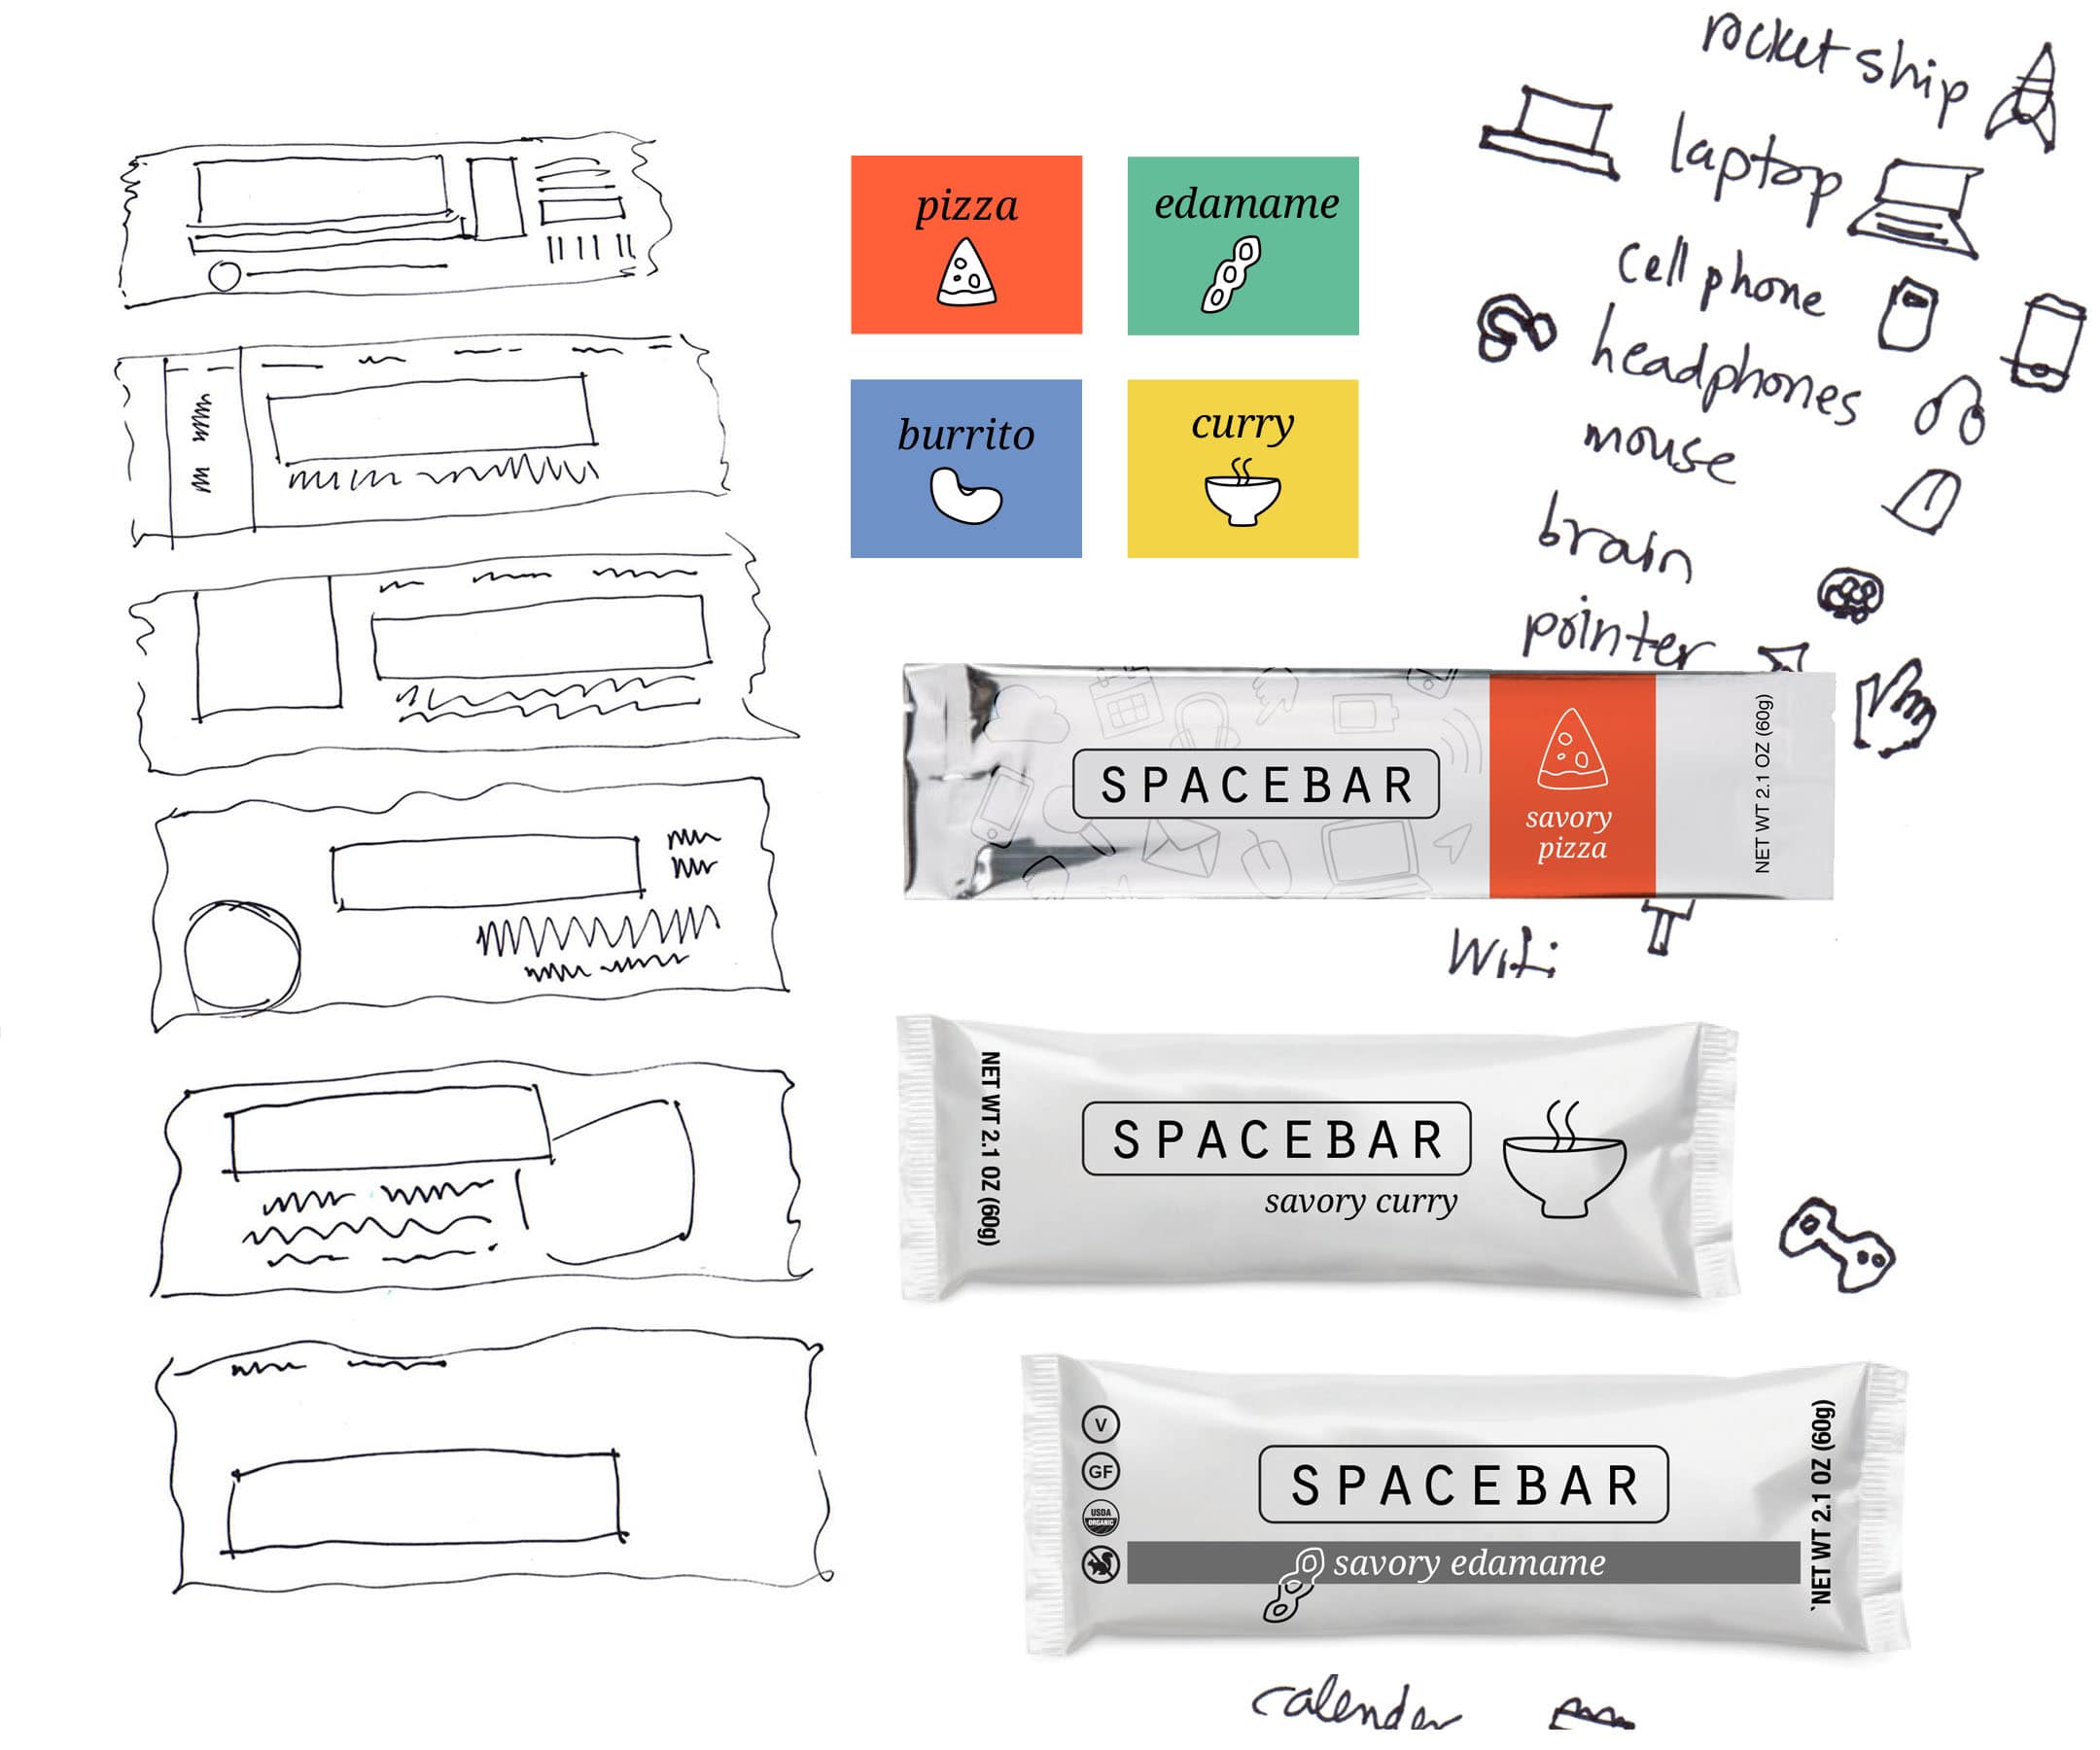 sketches and mockups of packaging ideas